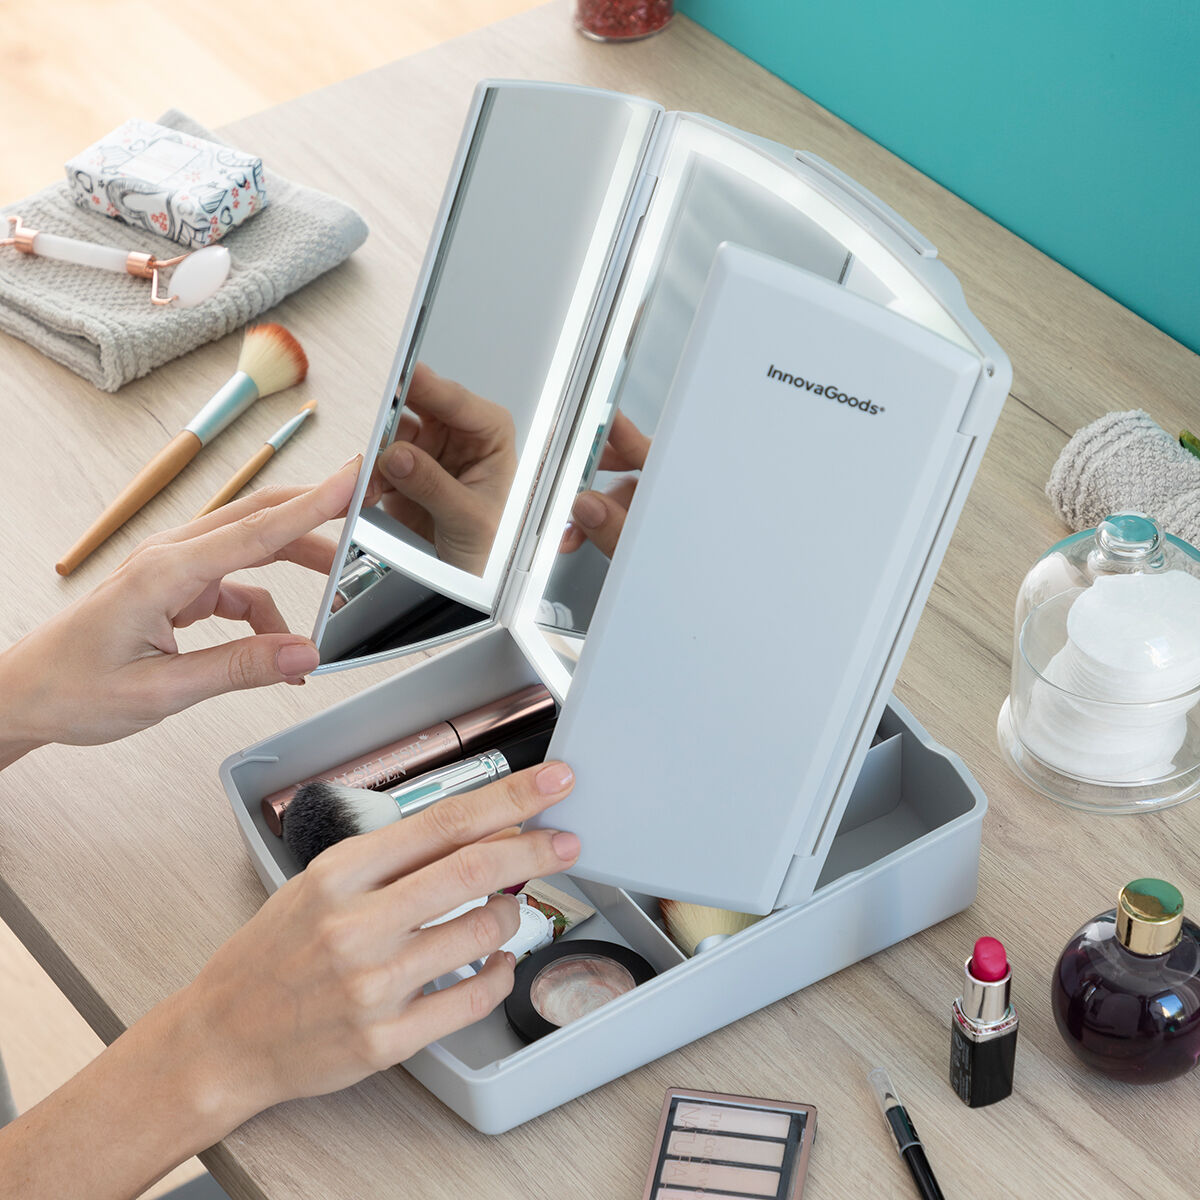 3-In-1 Folding LED Mirror with Make-up Organiser Panomir InnovaGoods-14